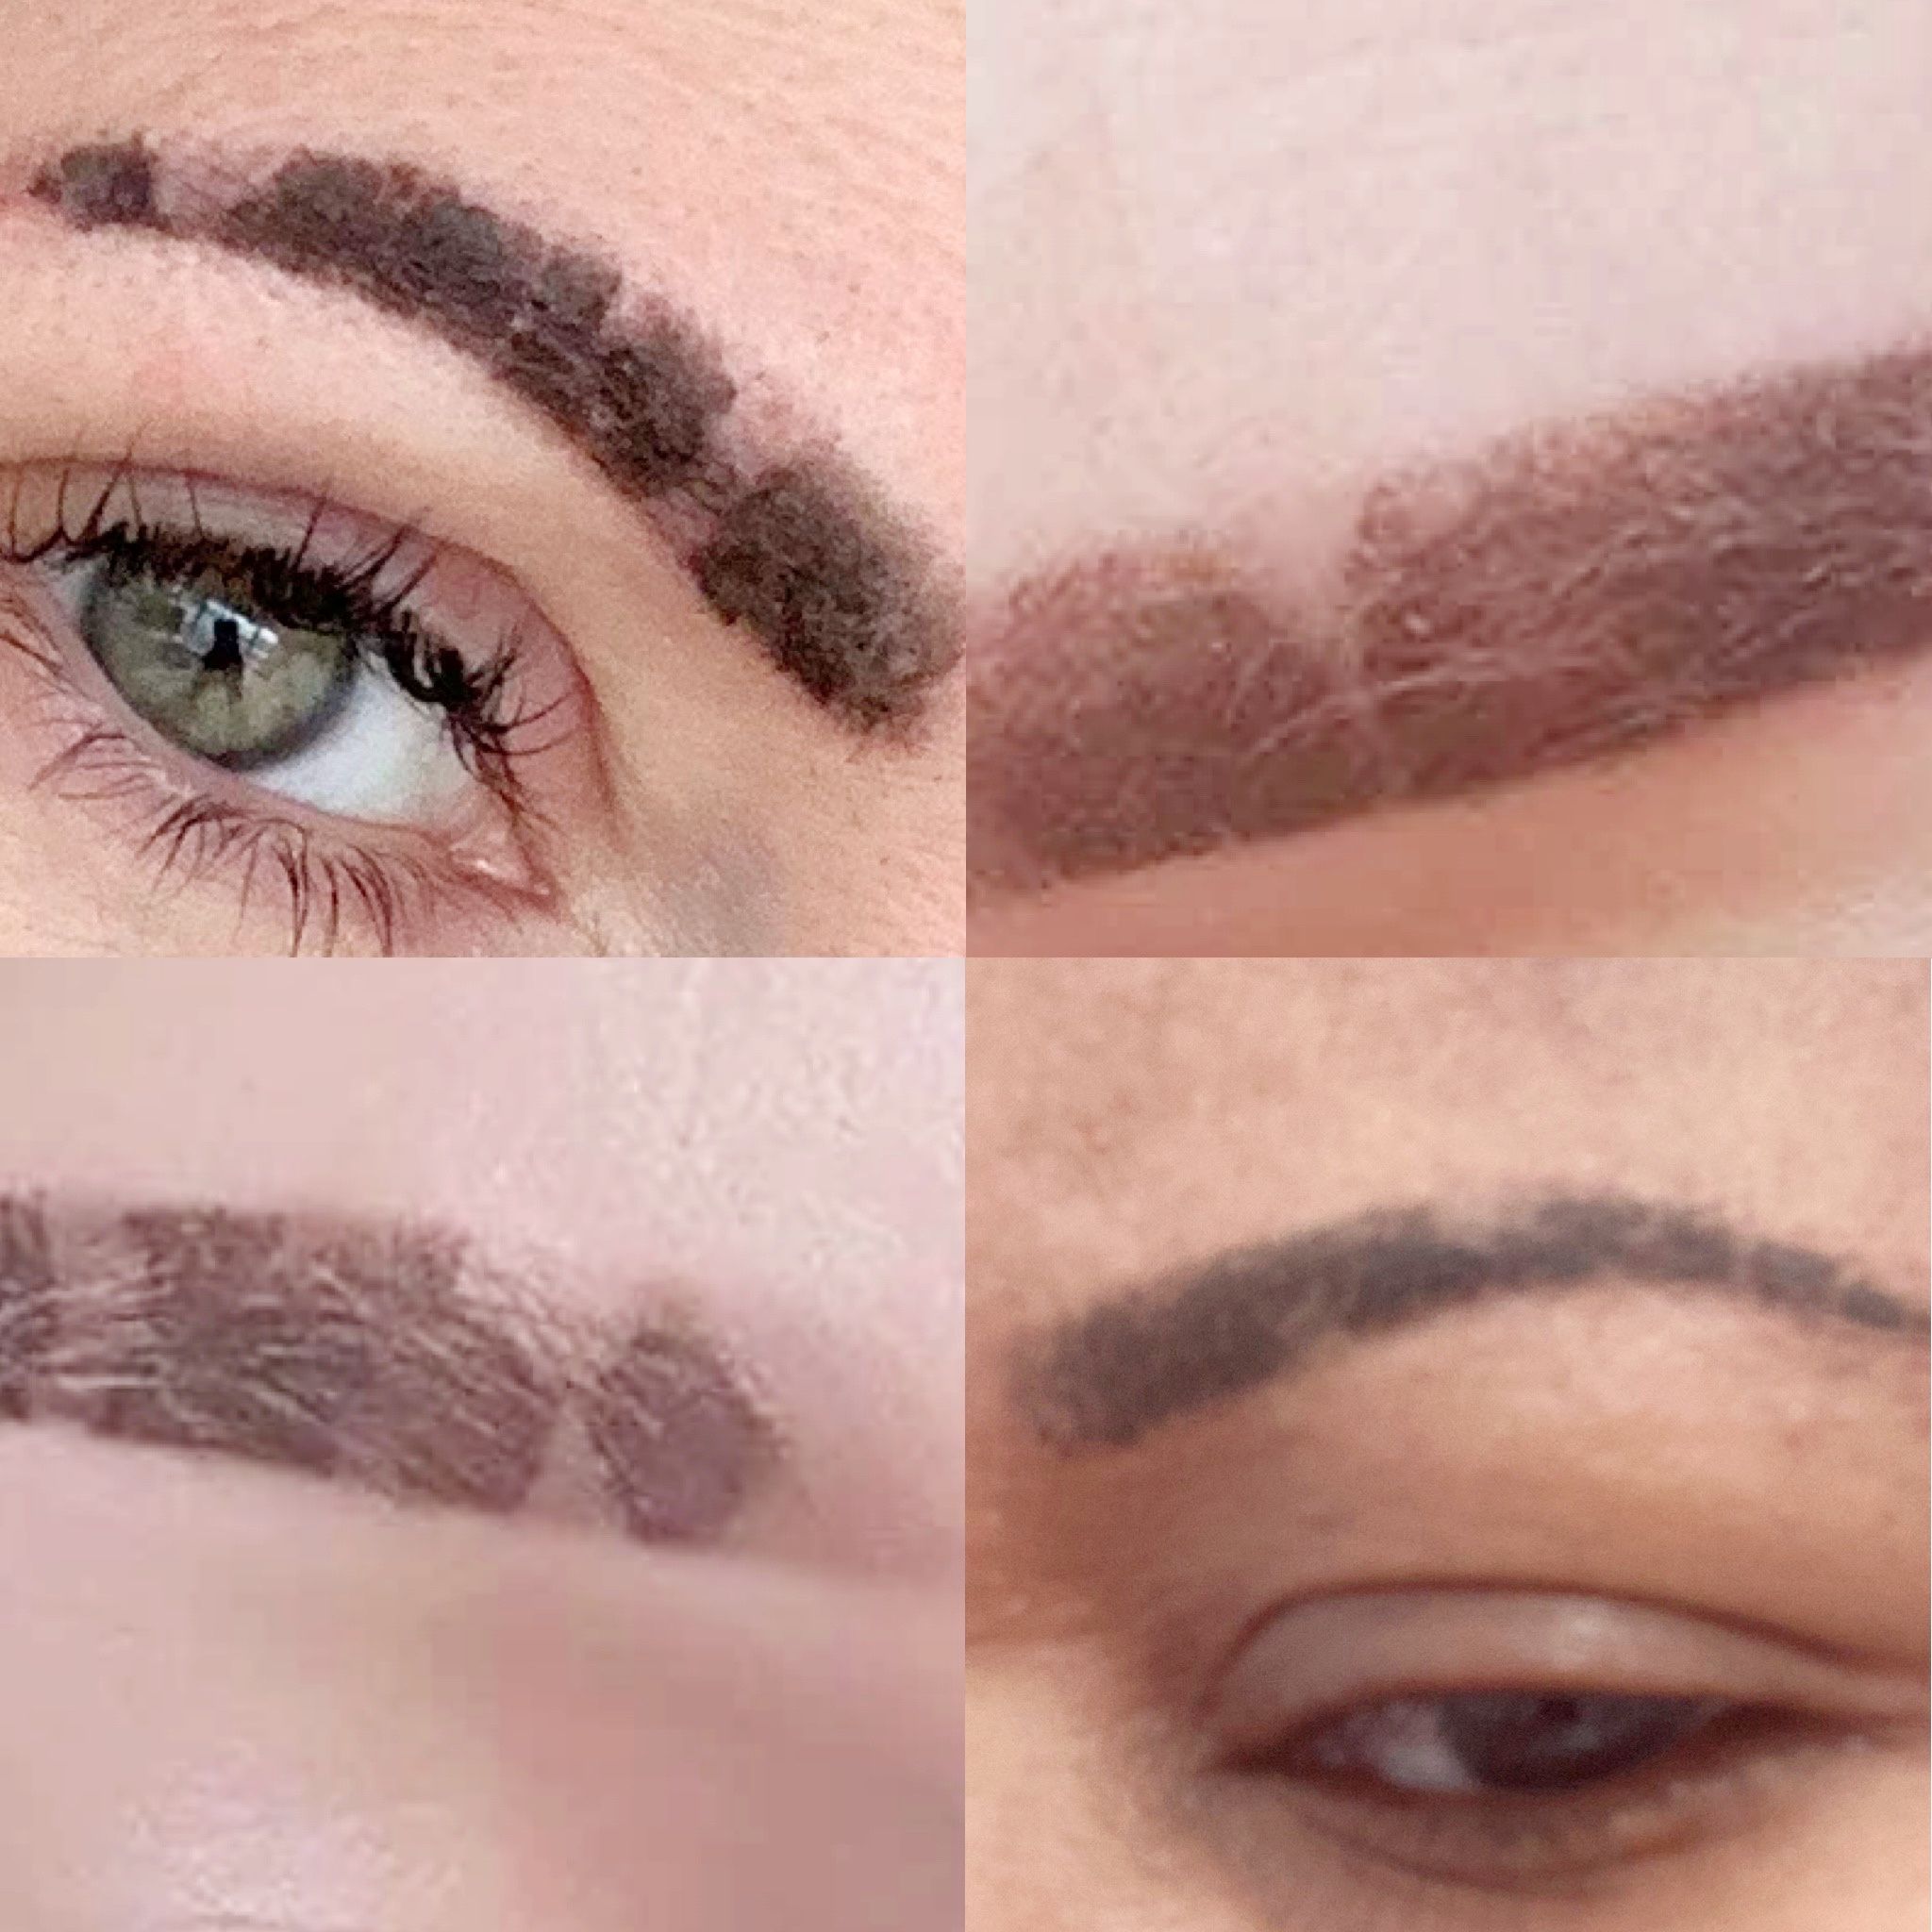 My MICROBLADE EYEBROW TATTOO Experience  Before After  6 Weeks After   YouTube